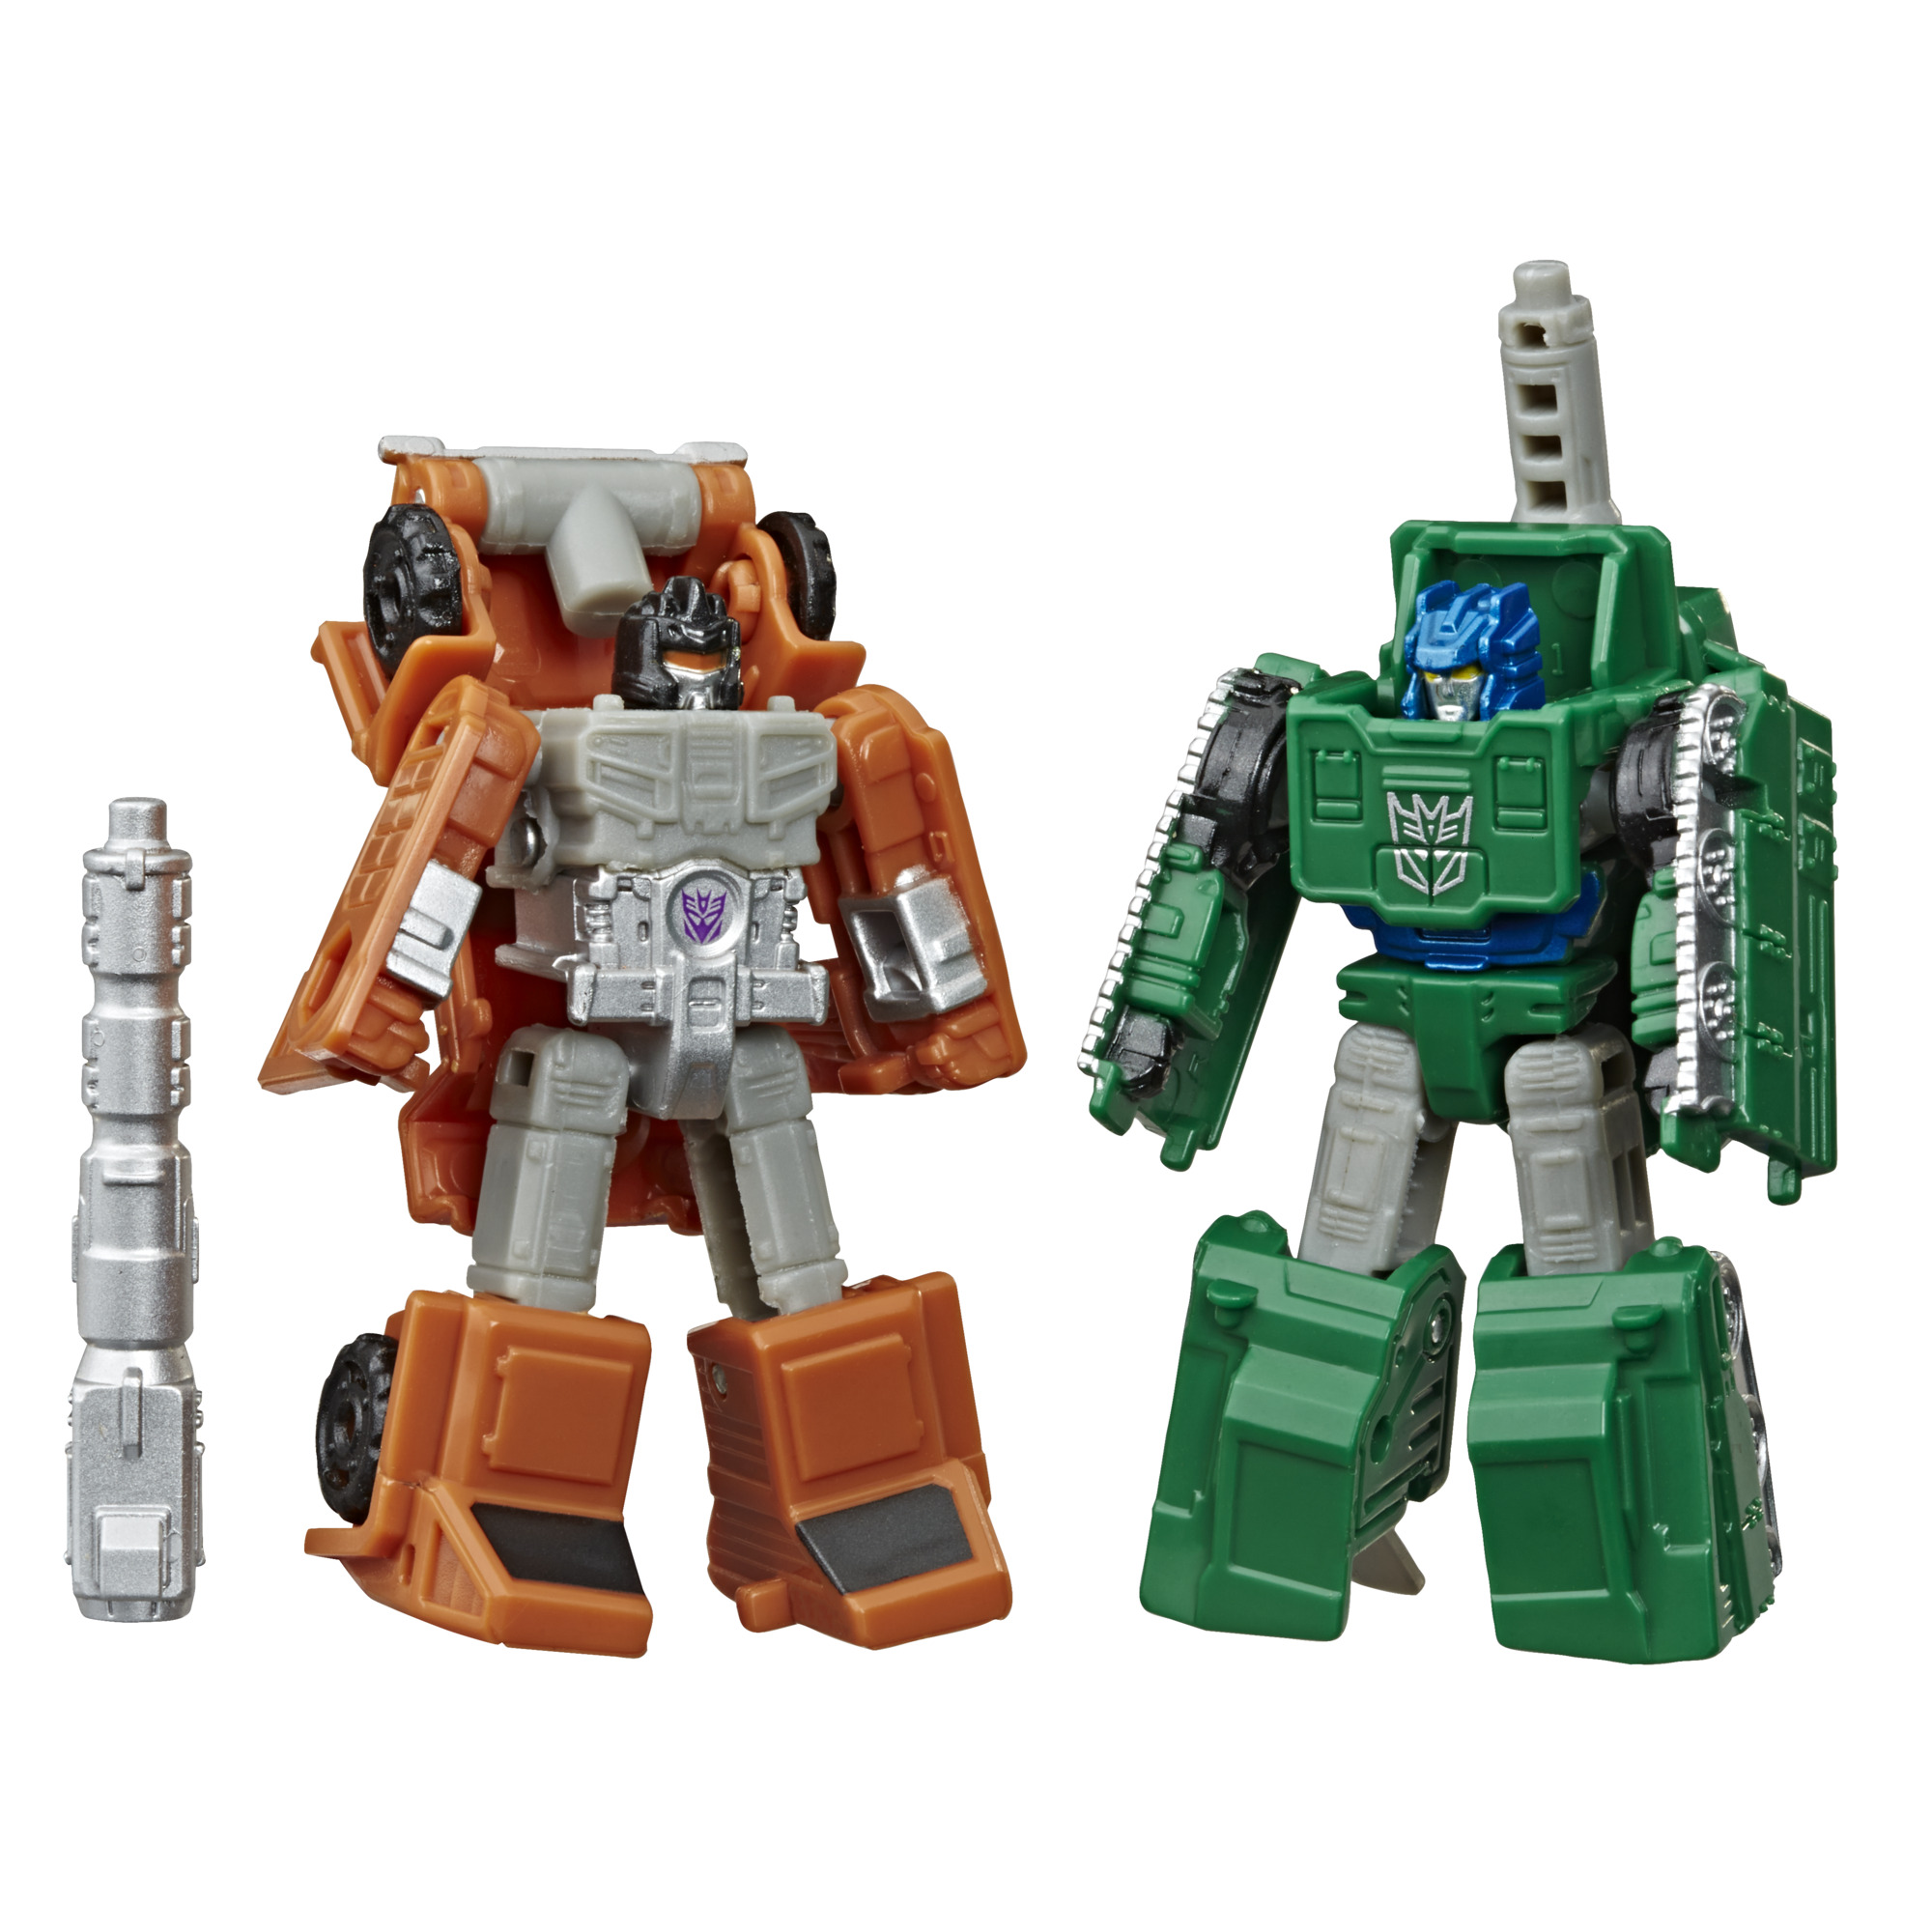 Transformers: Earthrise War for Cybertron Trilogy Bomb Shock and Deception Growl Toy Vehicle Action Figure Set for Boys and Girls - image 1 of 3